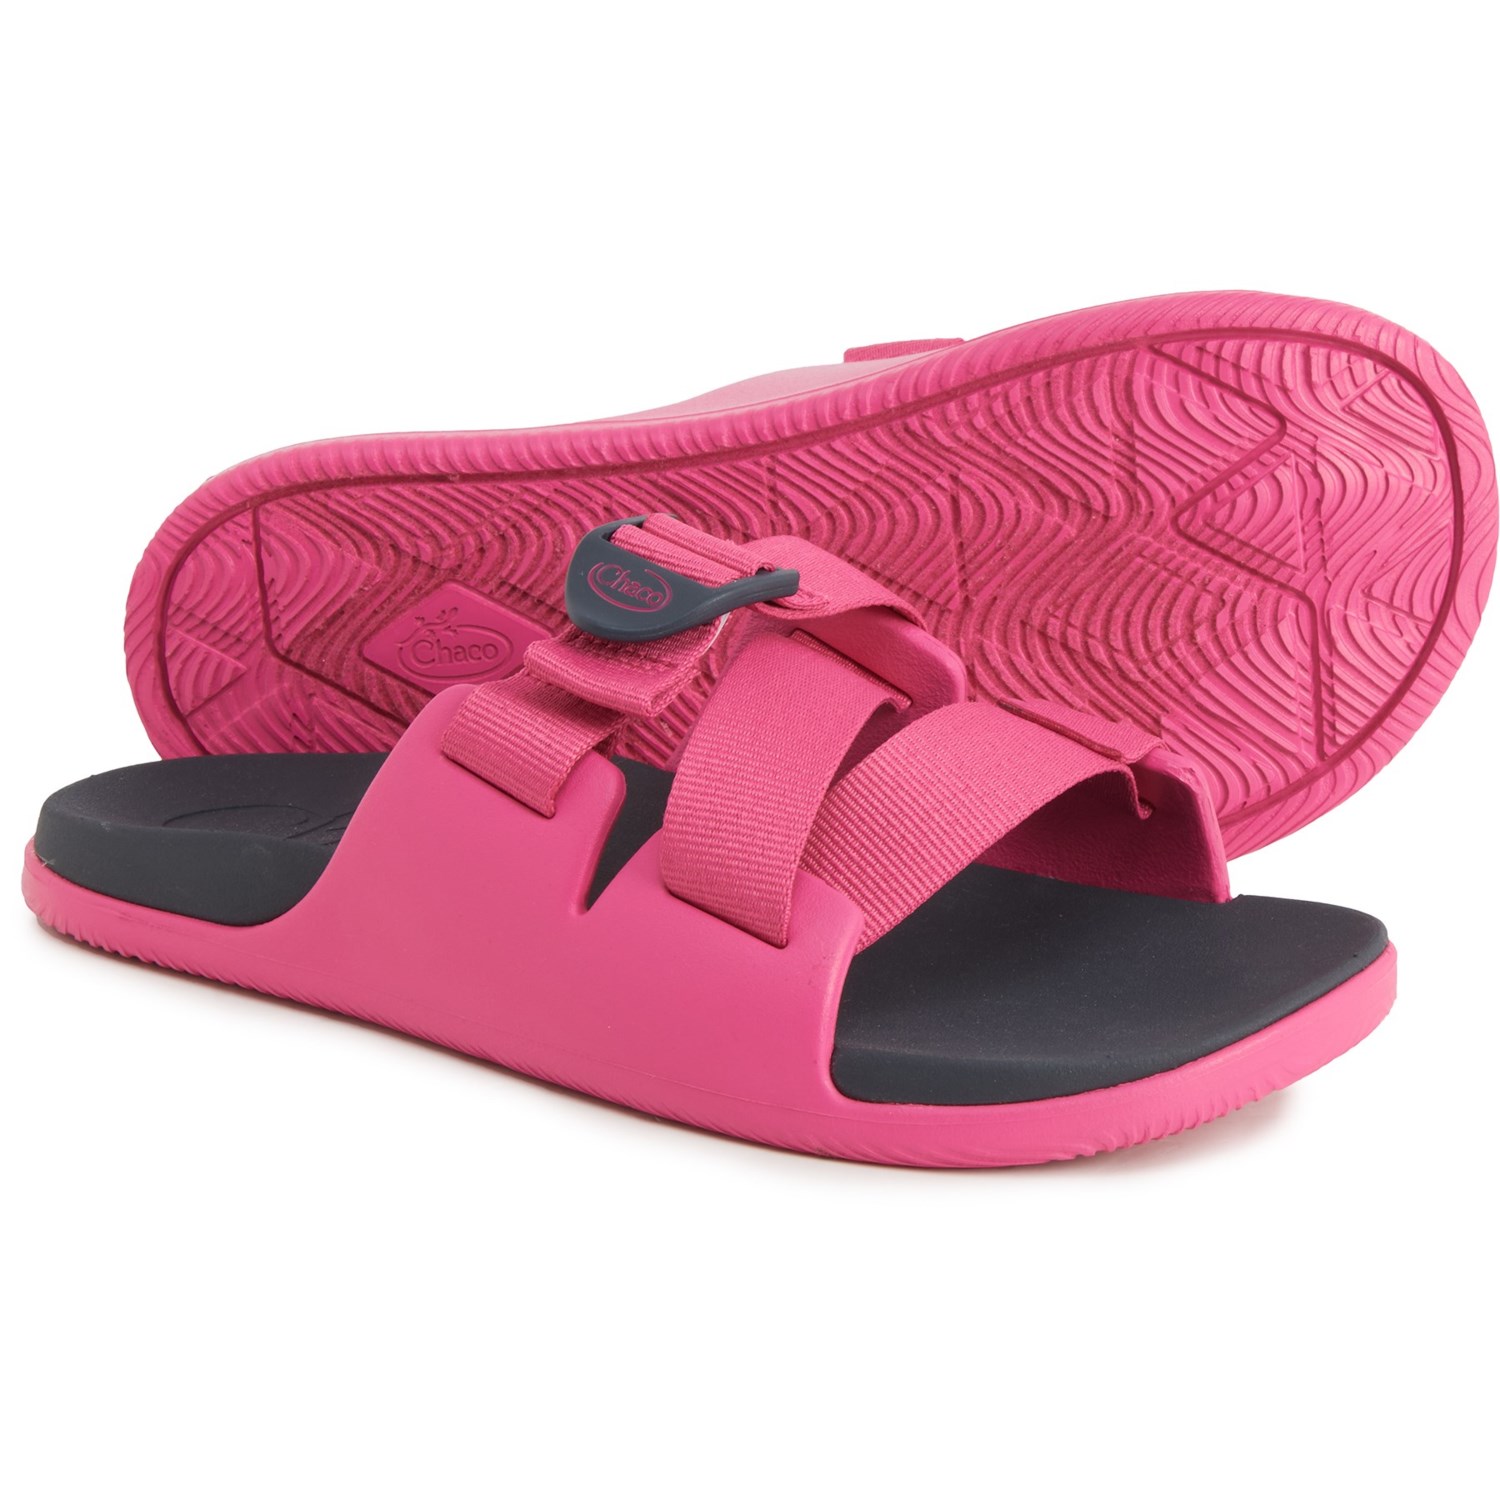 Chaco Chillos Slide Sandals (For Women) - Save 56%